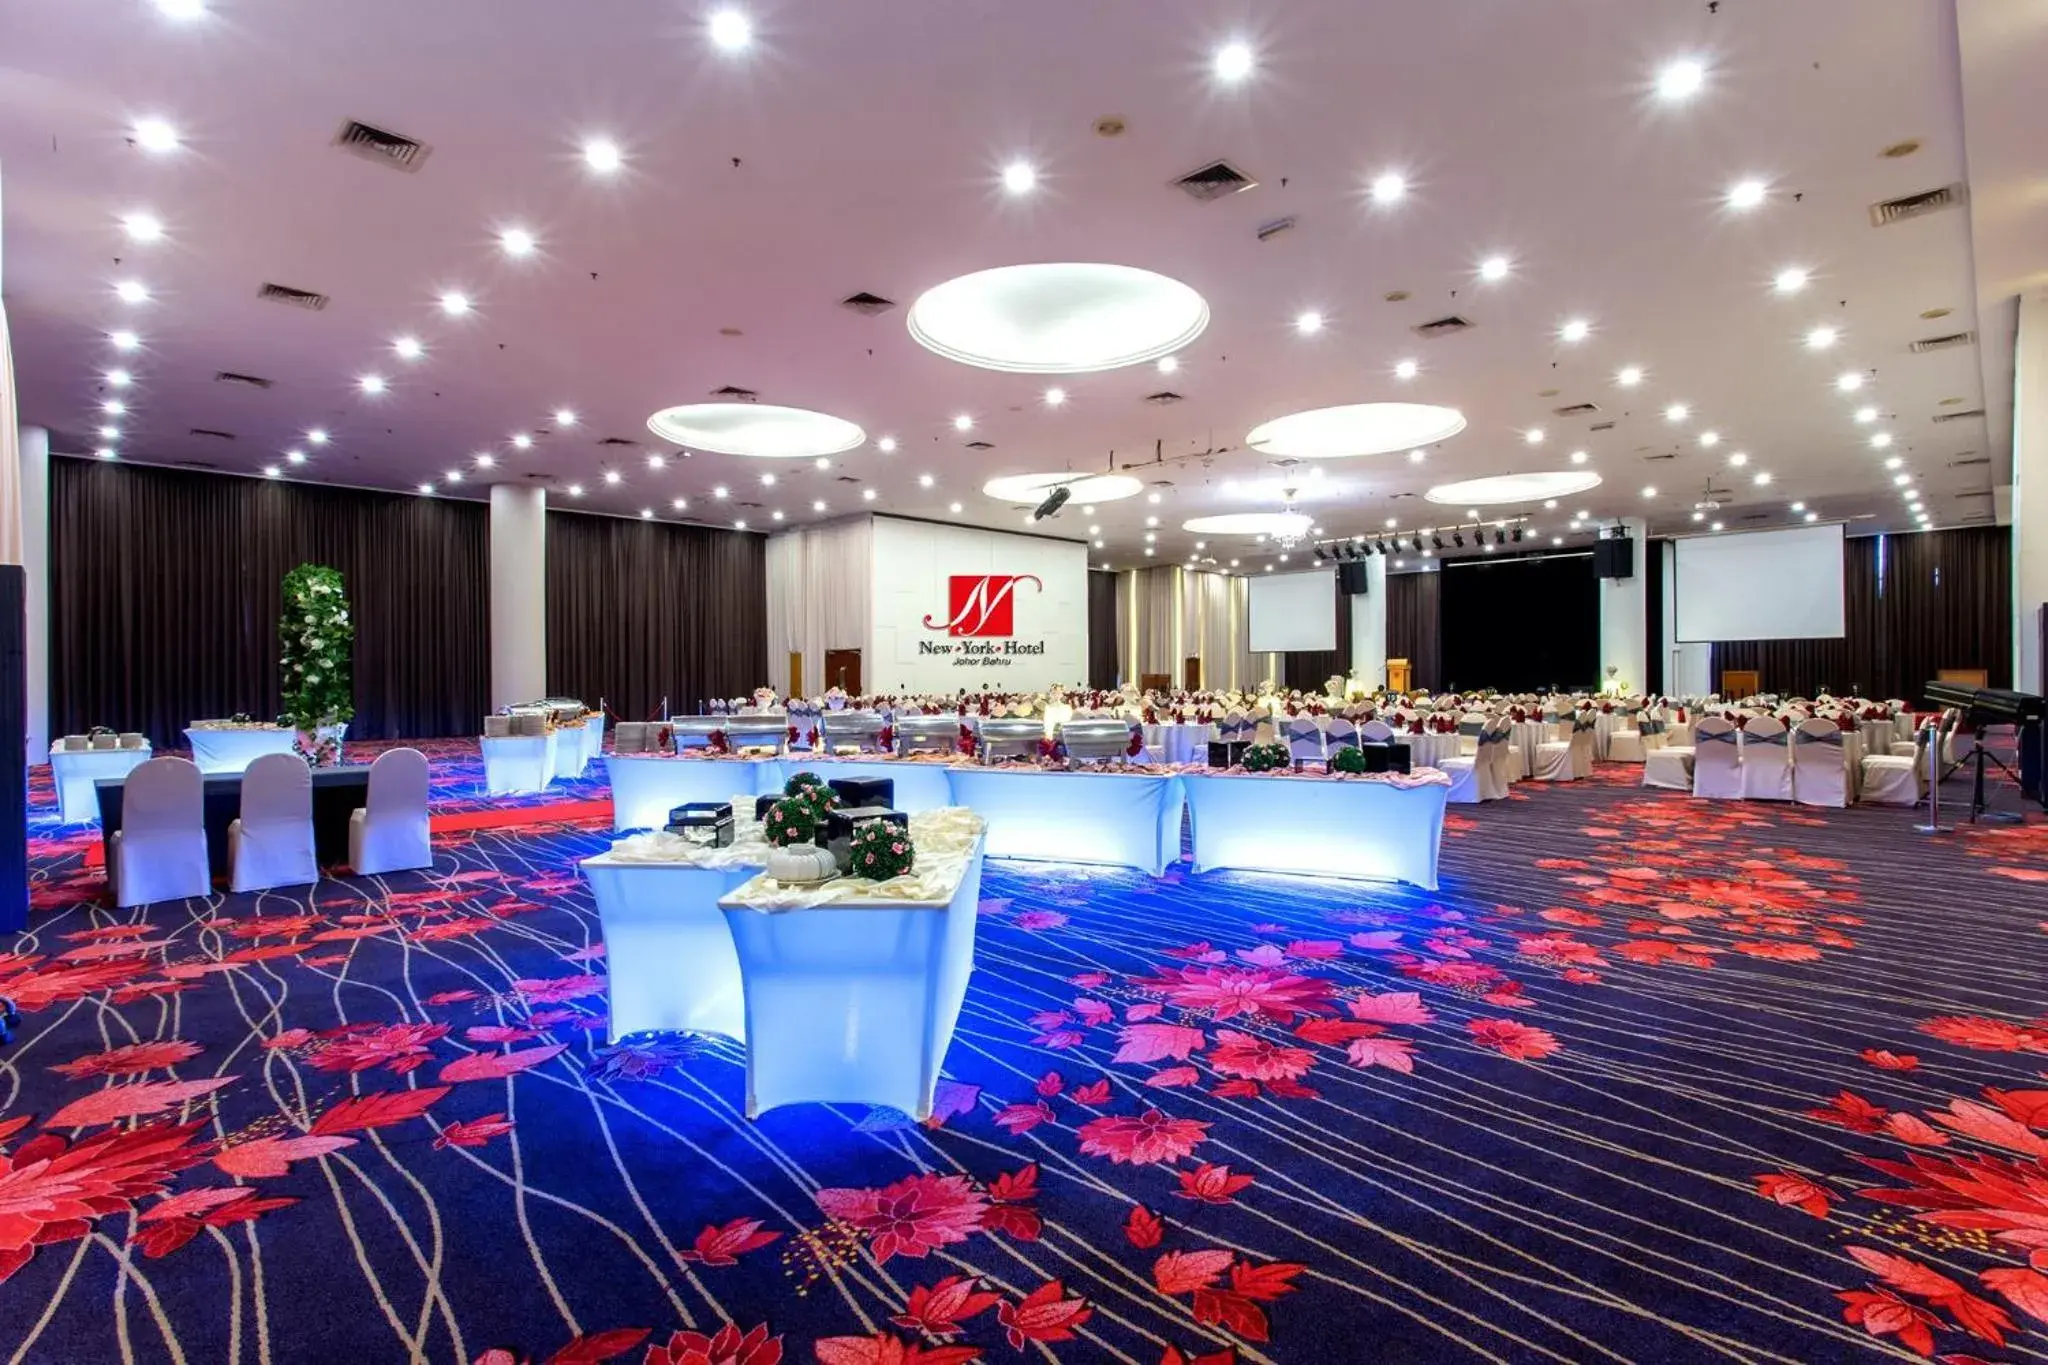 Business facilities, Banquet Facilities in New York Hotel